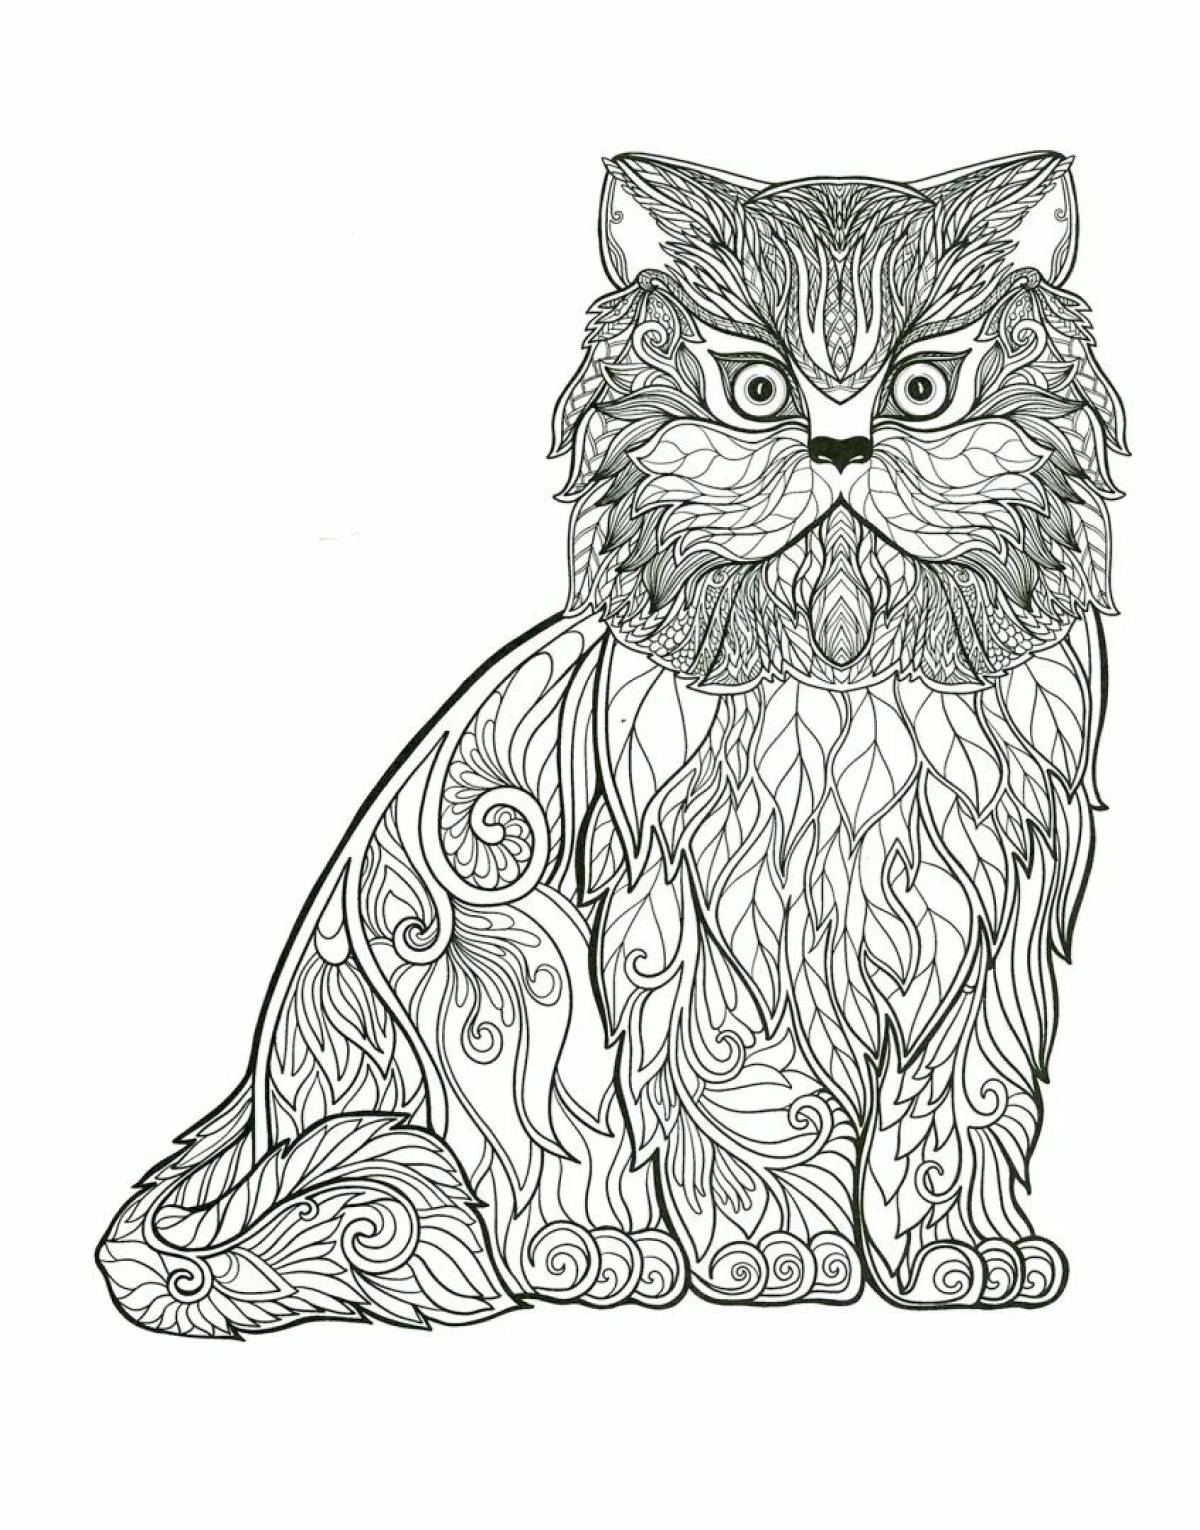 Coloring page wild cat with a pattern